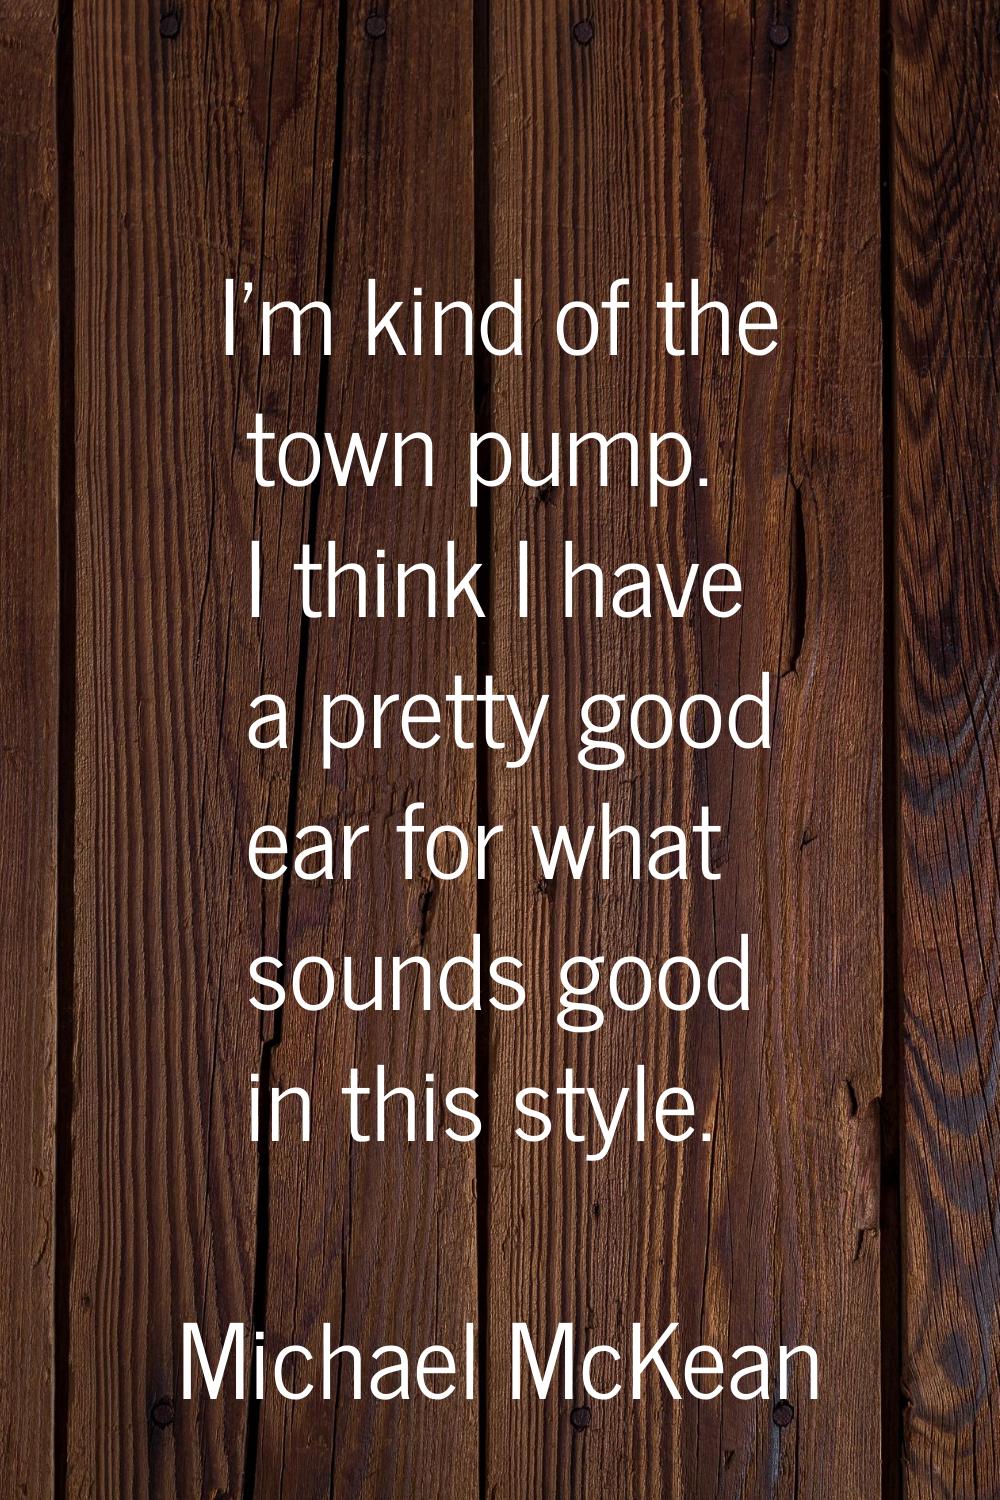 I'm kind of the town pump. I think I have a pretty good ear for what sounds good in this style.